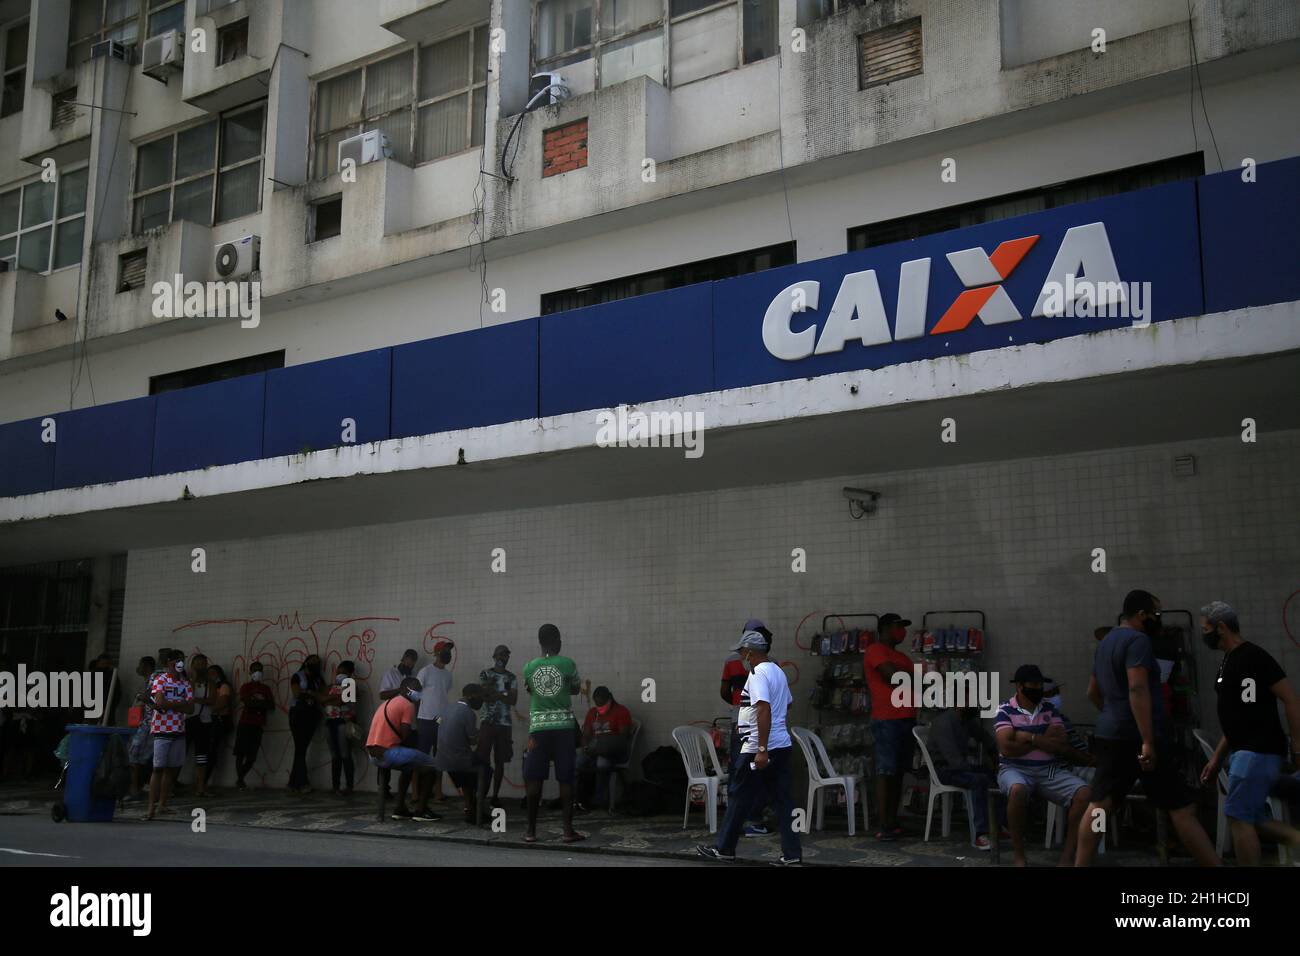 salvador, bahia / brazil - september 8, 2020: people face queues for assistance at Caixa Economica Federal in the neighborhood of Comercio, in the cit Stock Photo